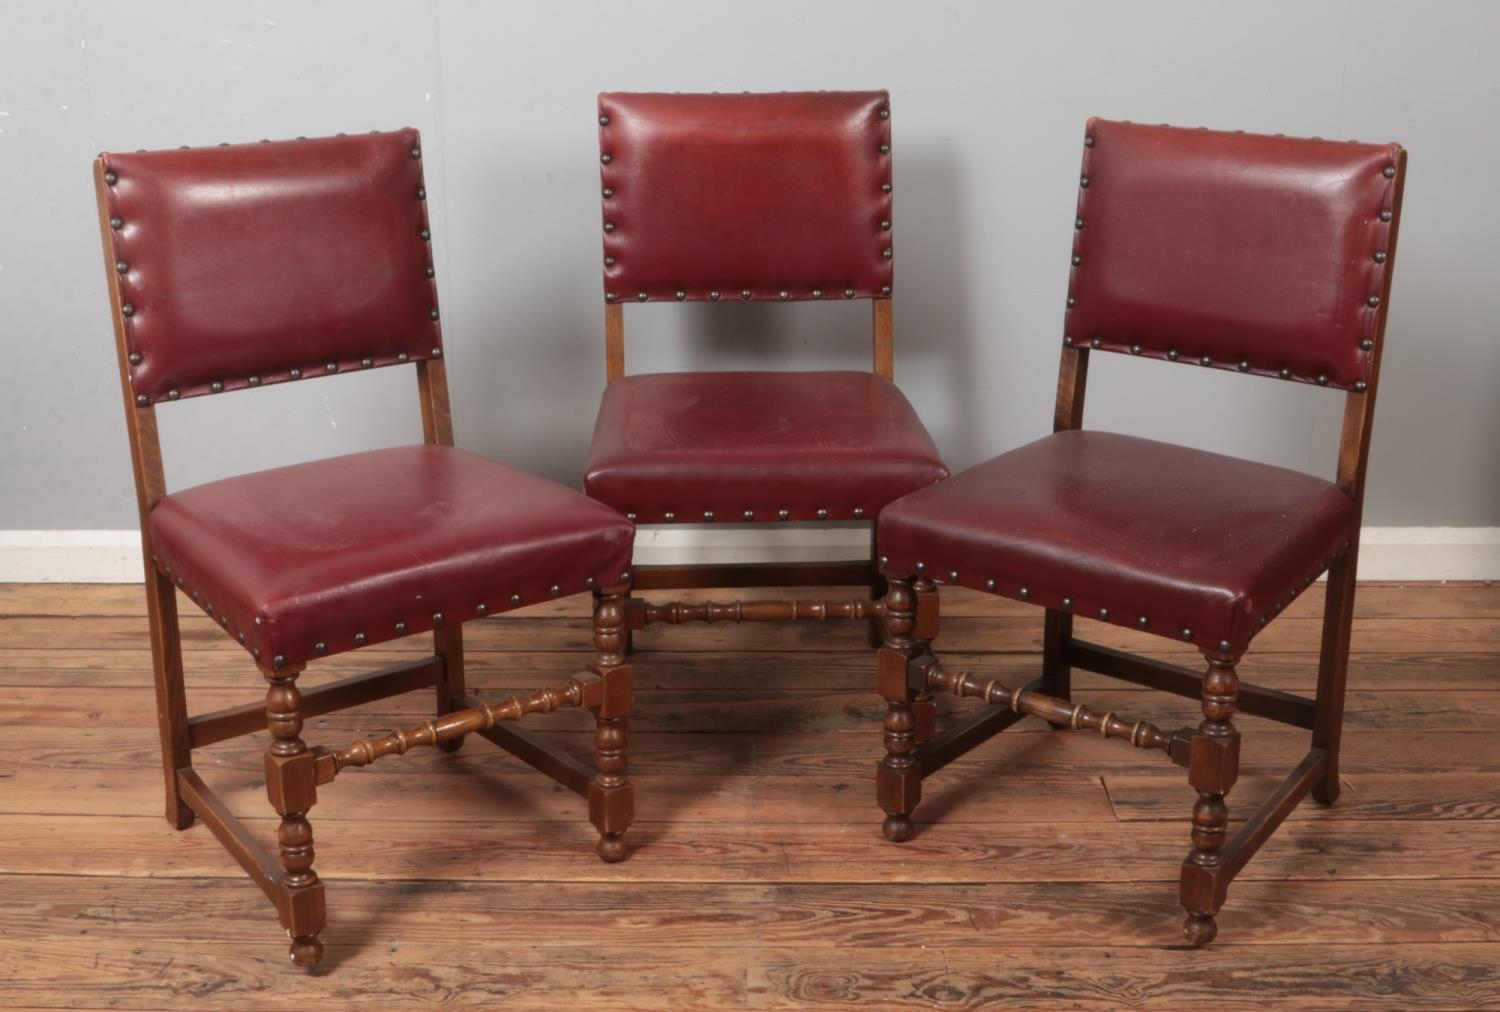 A set of six oak and red leather dining chairs. Includes two carvers. - Image 3 of 3